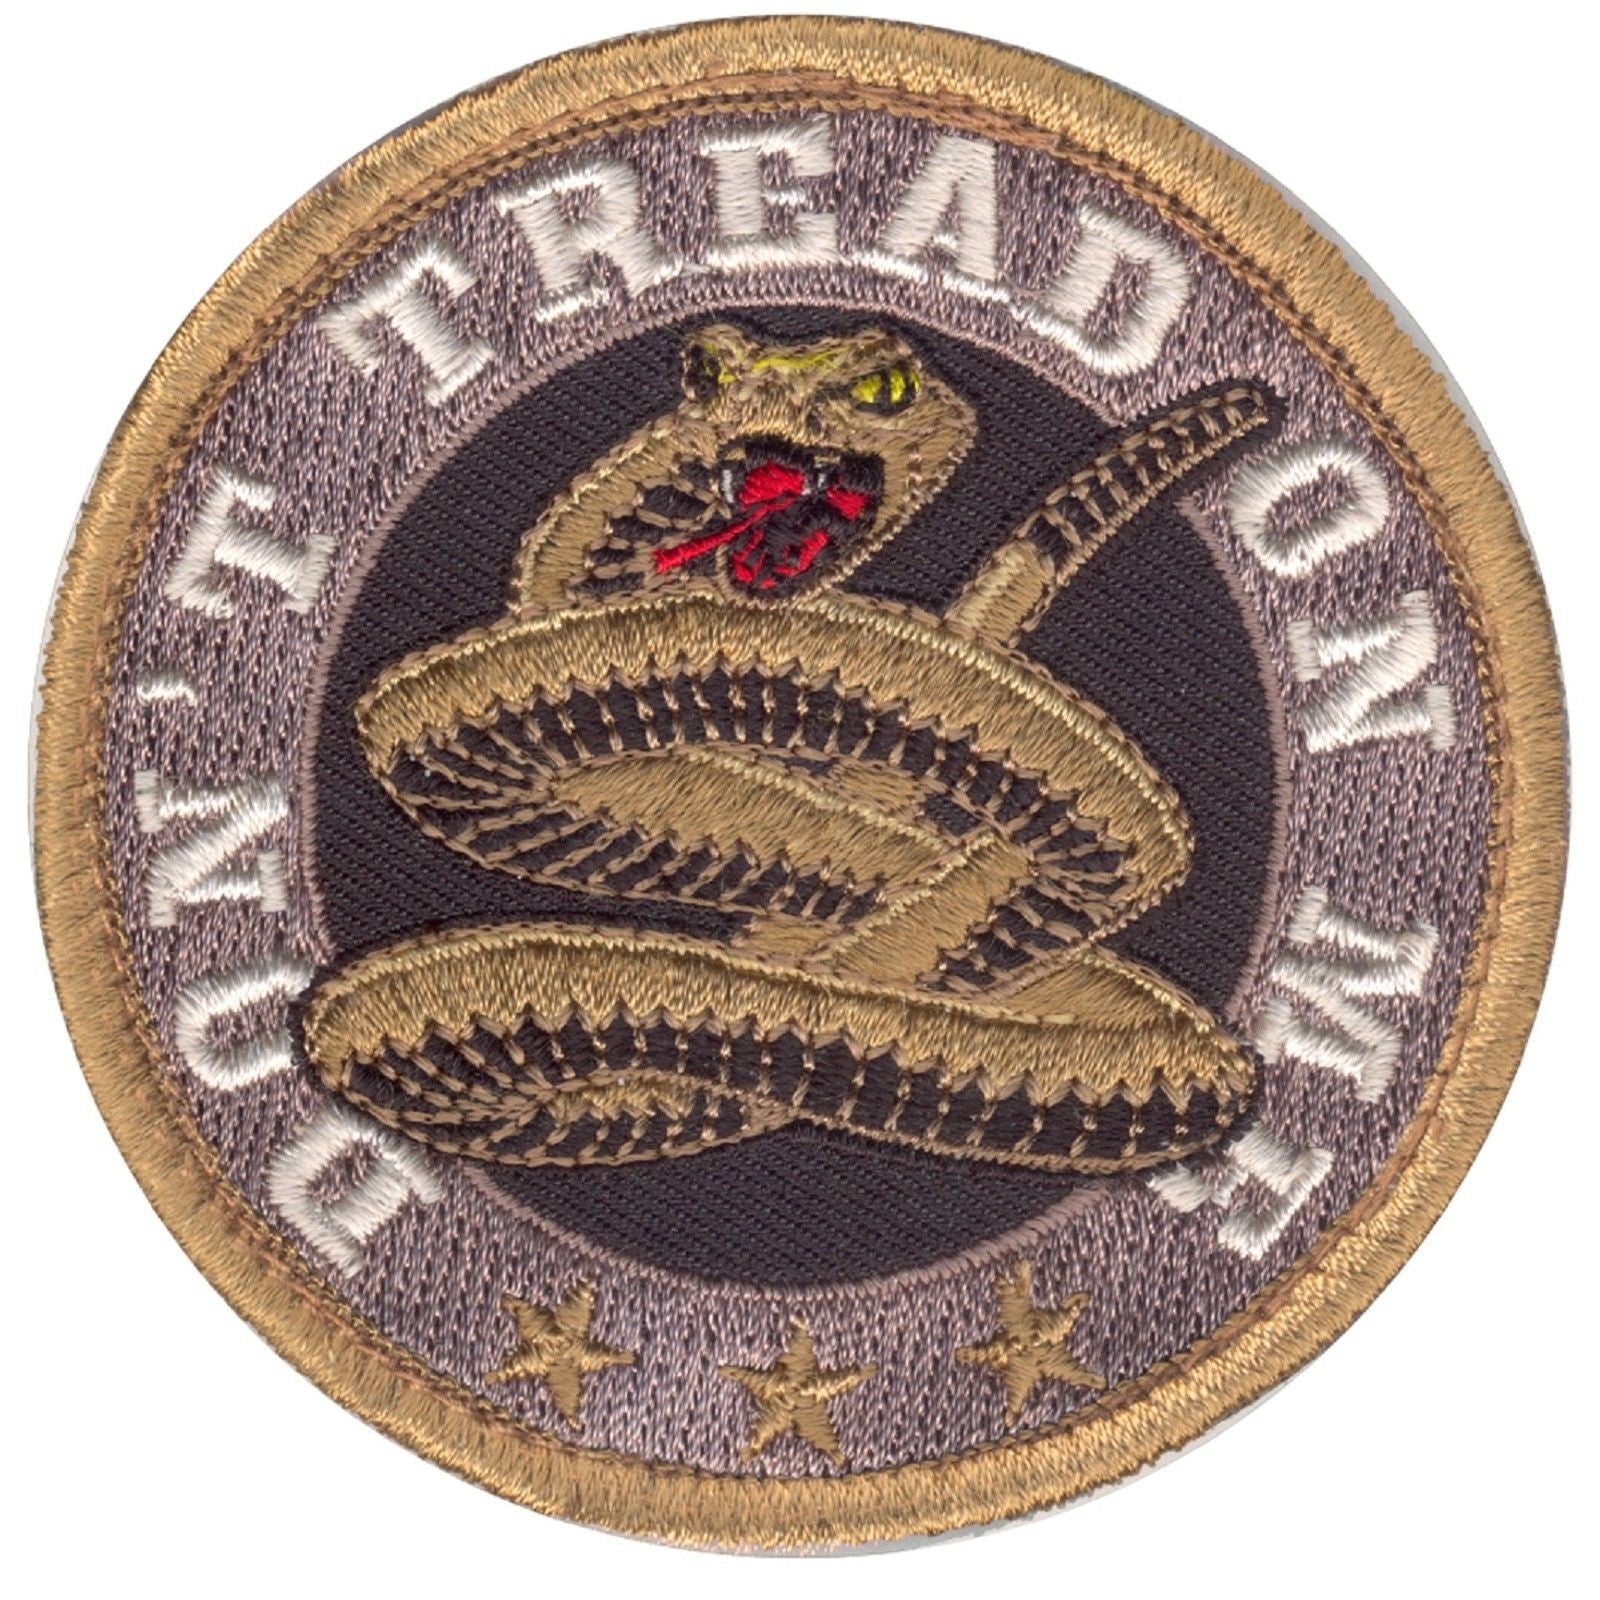  Don't Tread On Me Tactical Morale Patch - Coyote Tan